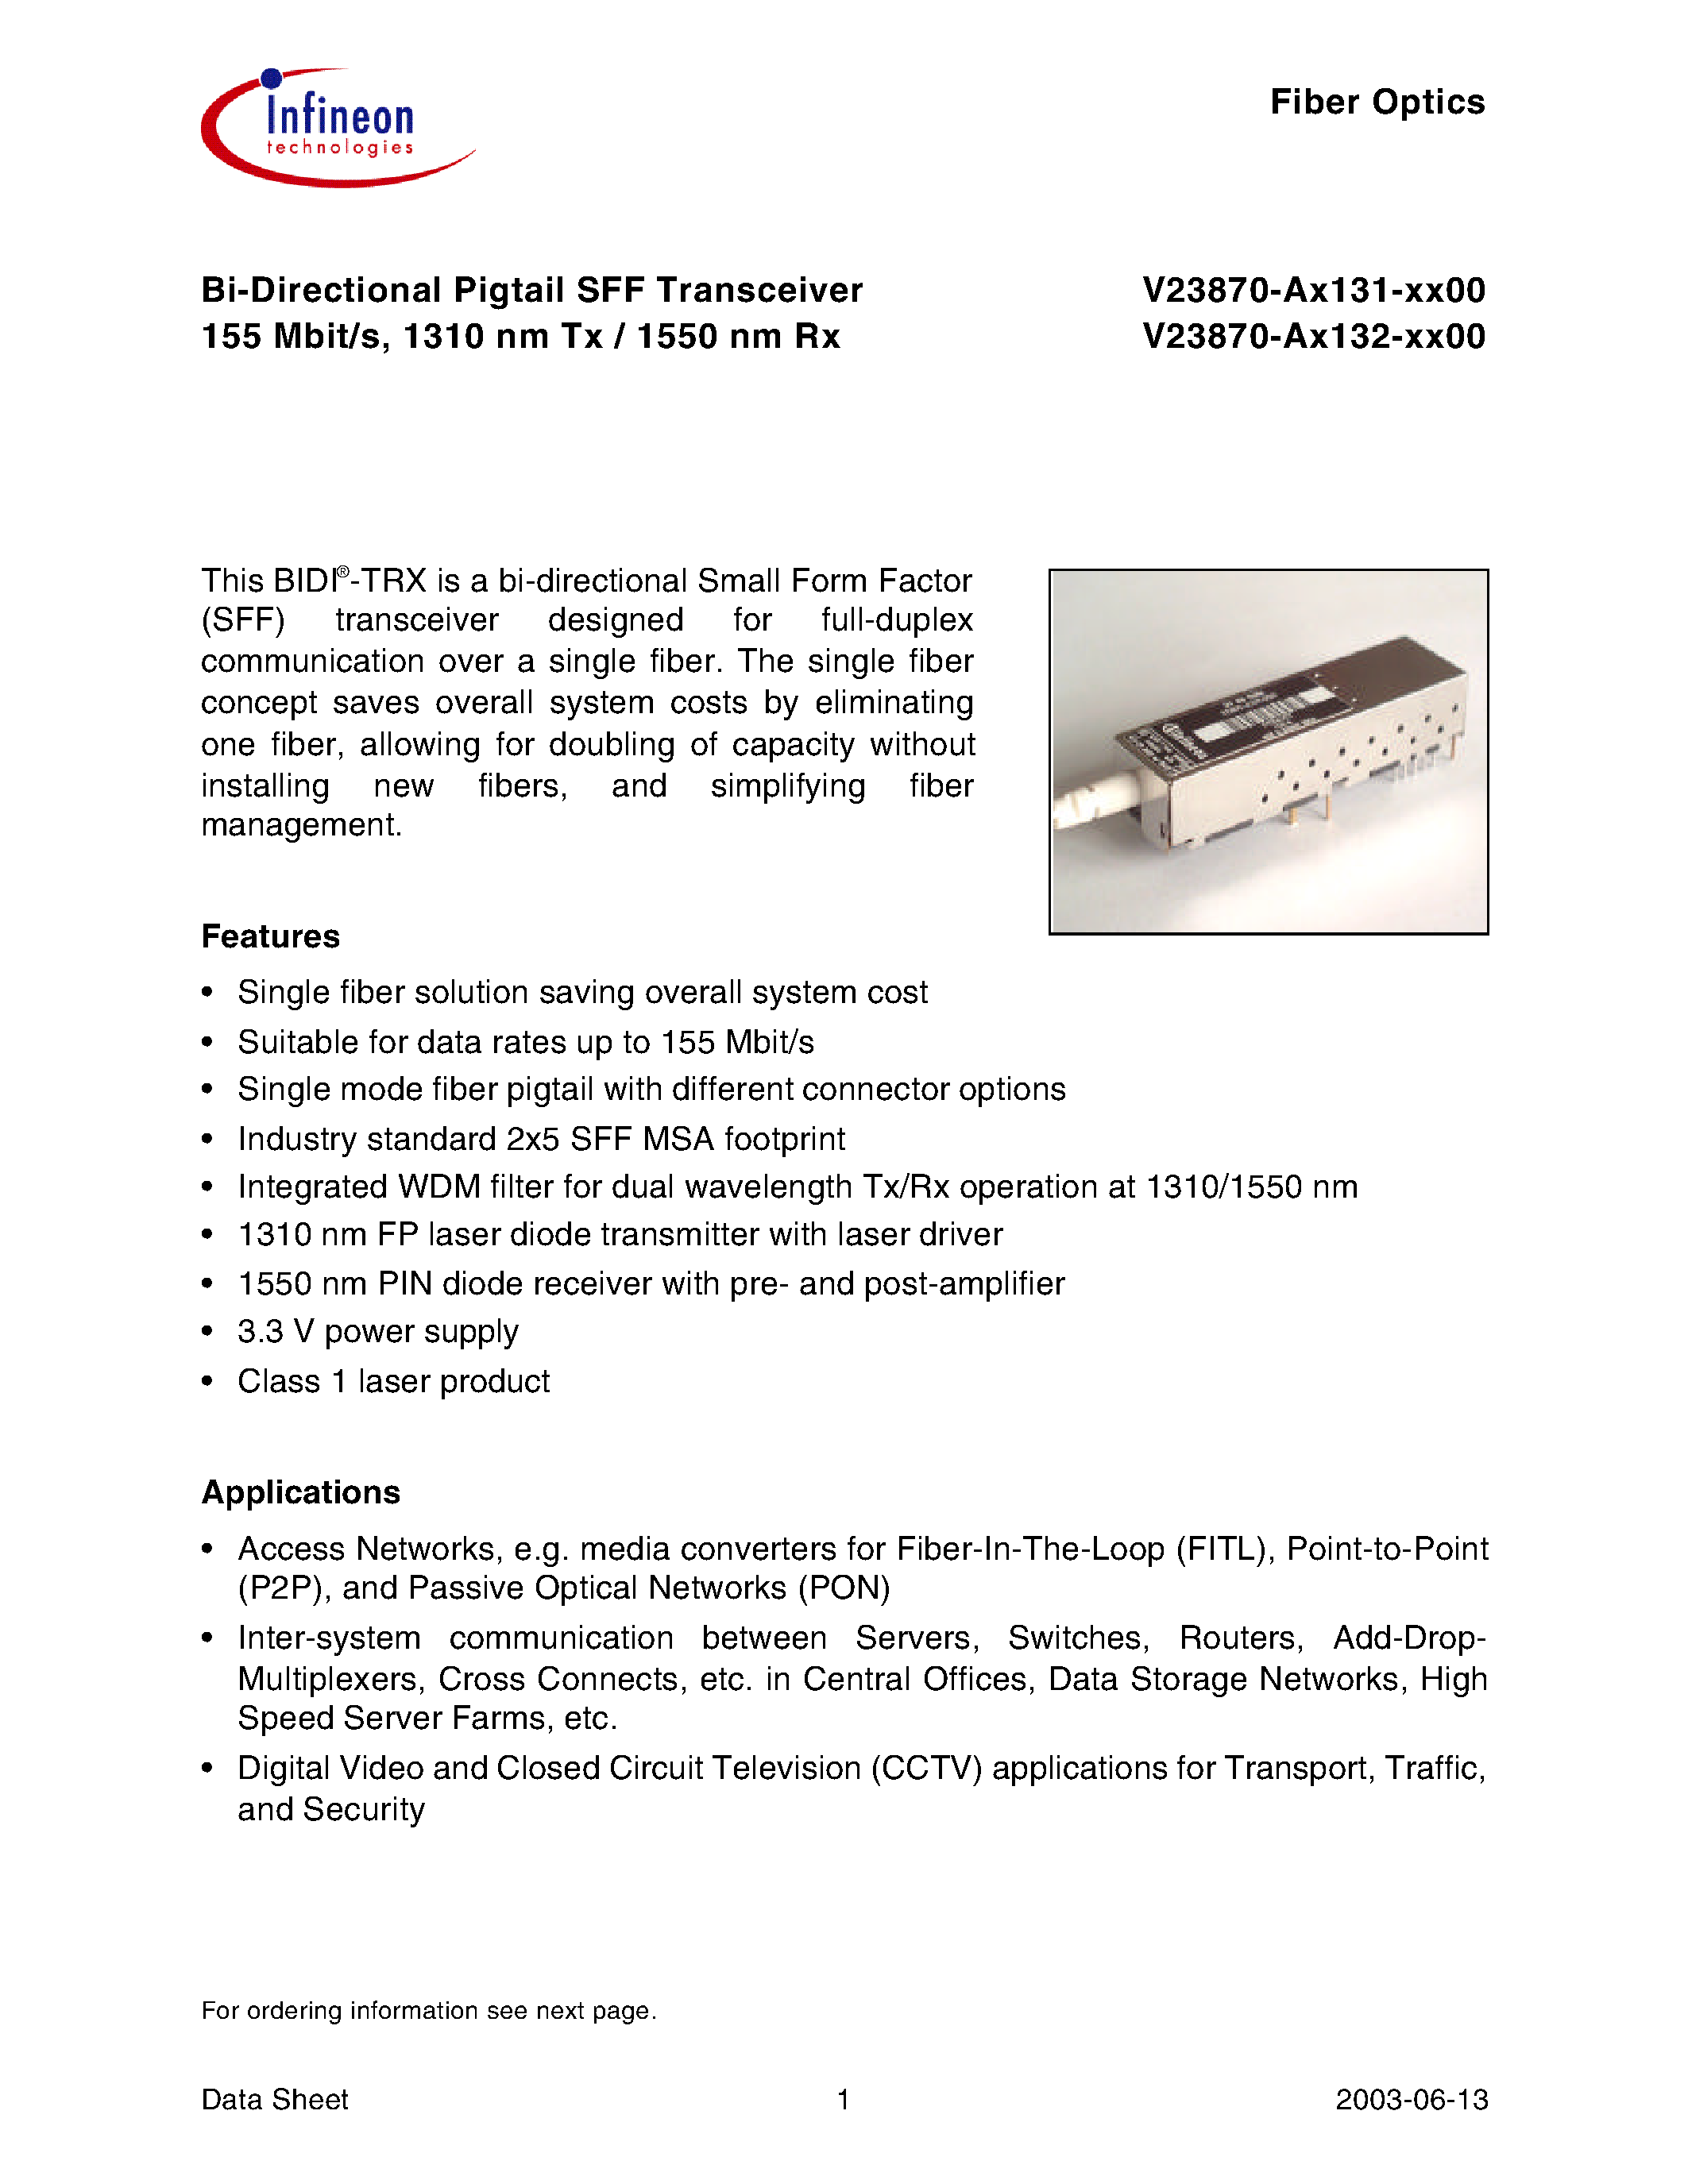 Datasheet V23870-A3132-K600 - Bi-Directional Pigtail SFF Transceiver 155 Mbit/s/ 1310 nm Tx / 1550 nm Rx page 1